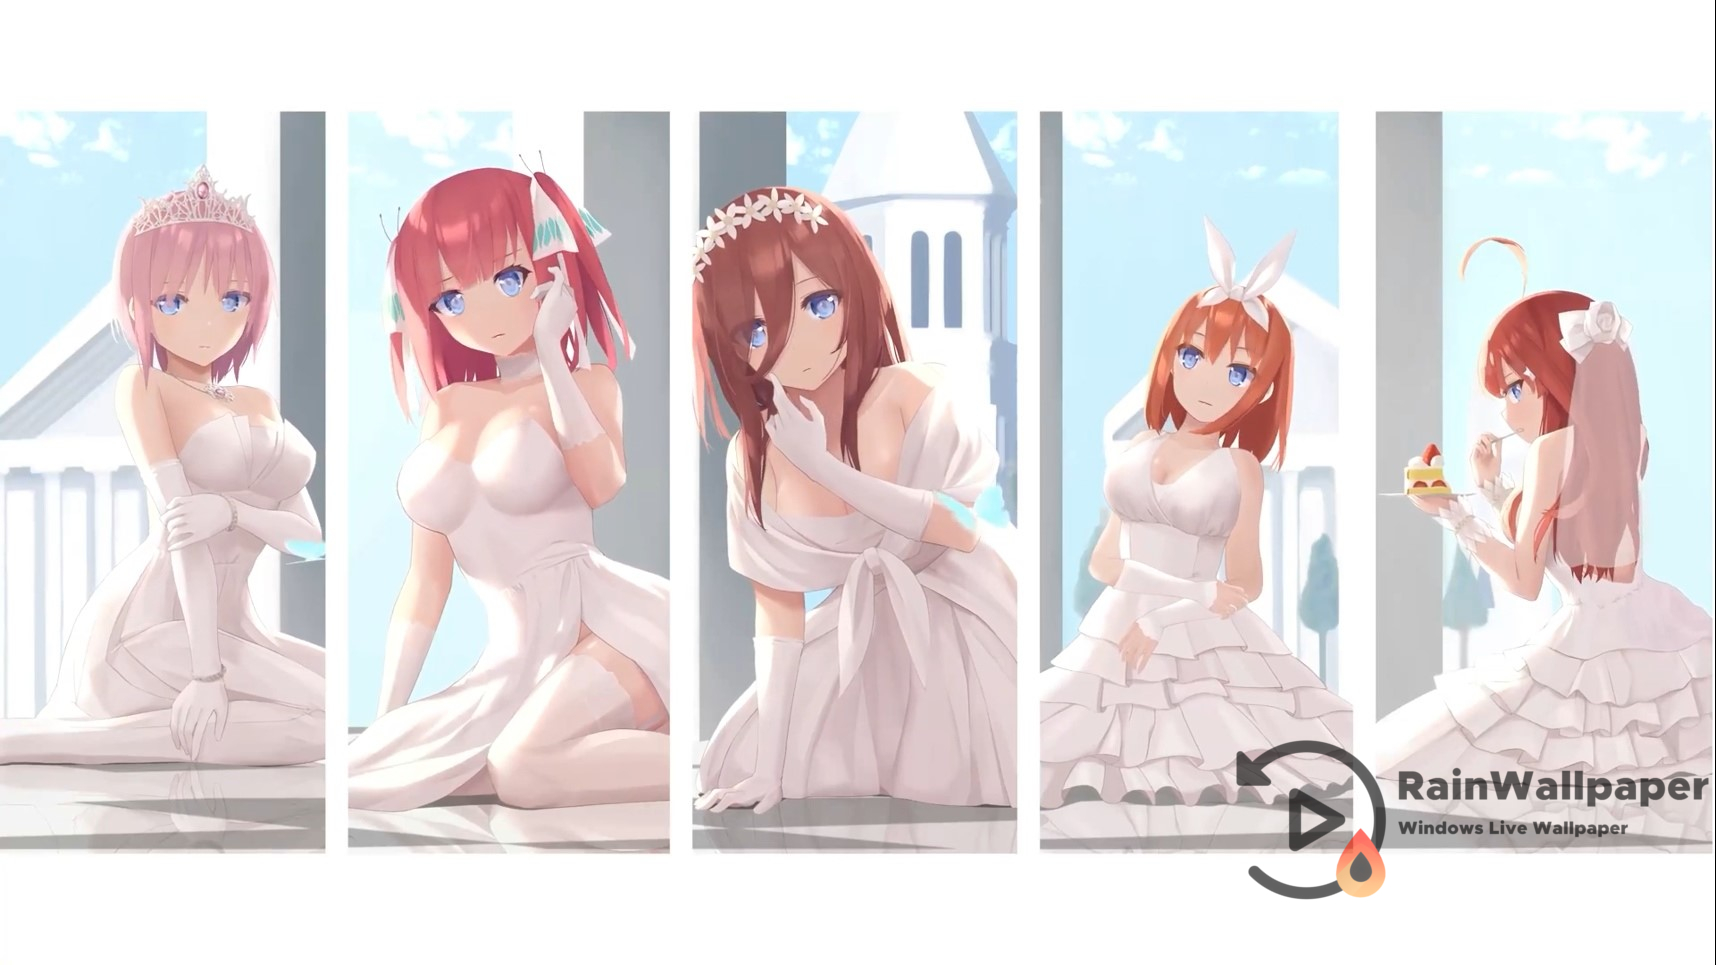 Anime The Quintessential Quintuplets by Jimking on DeviantArt